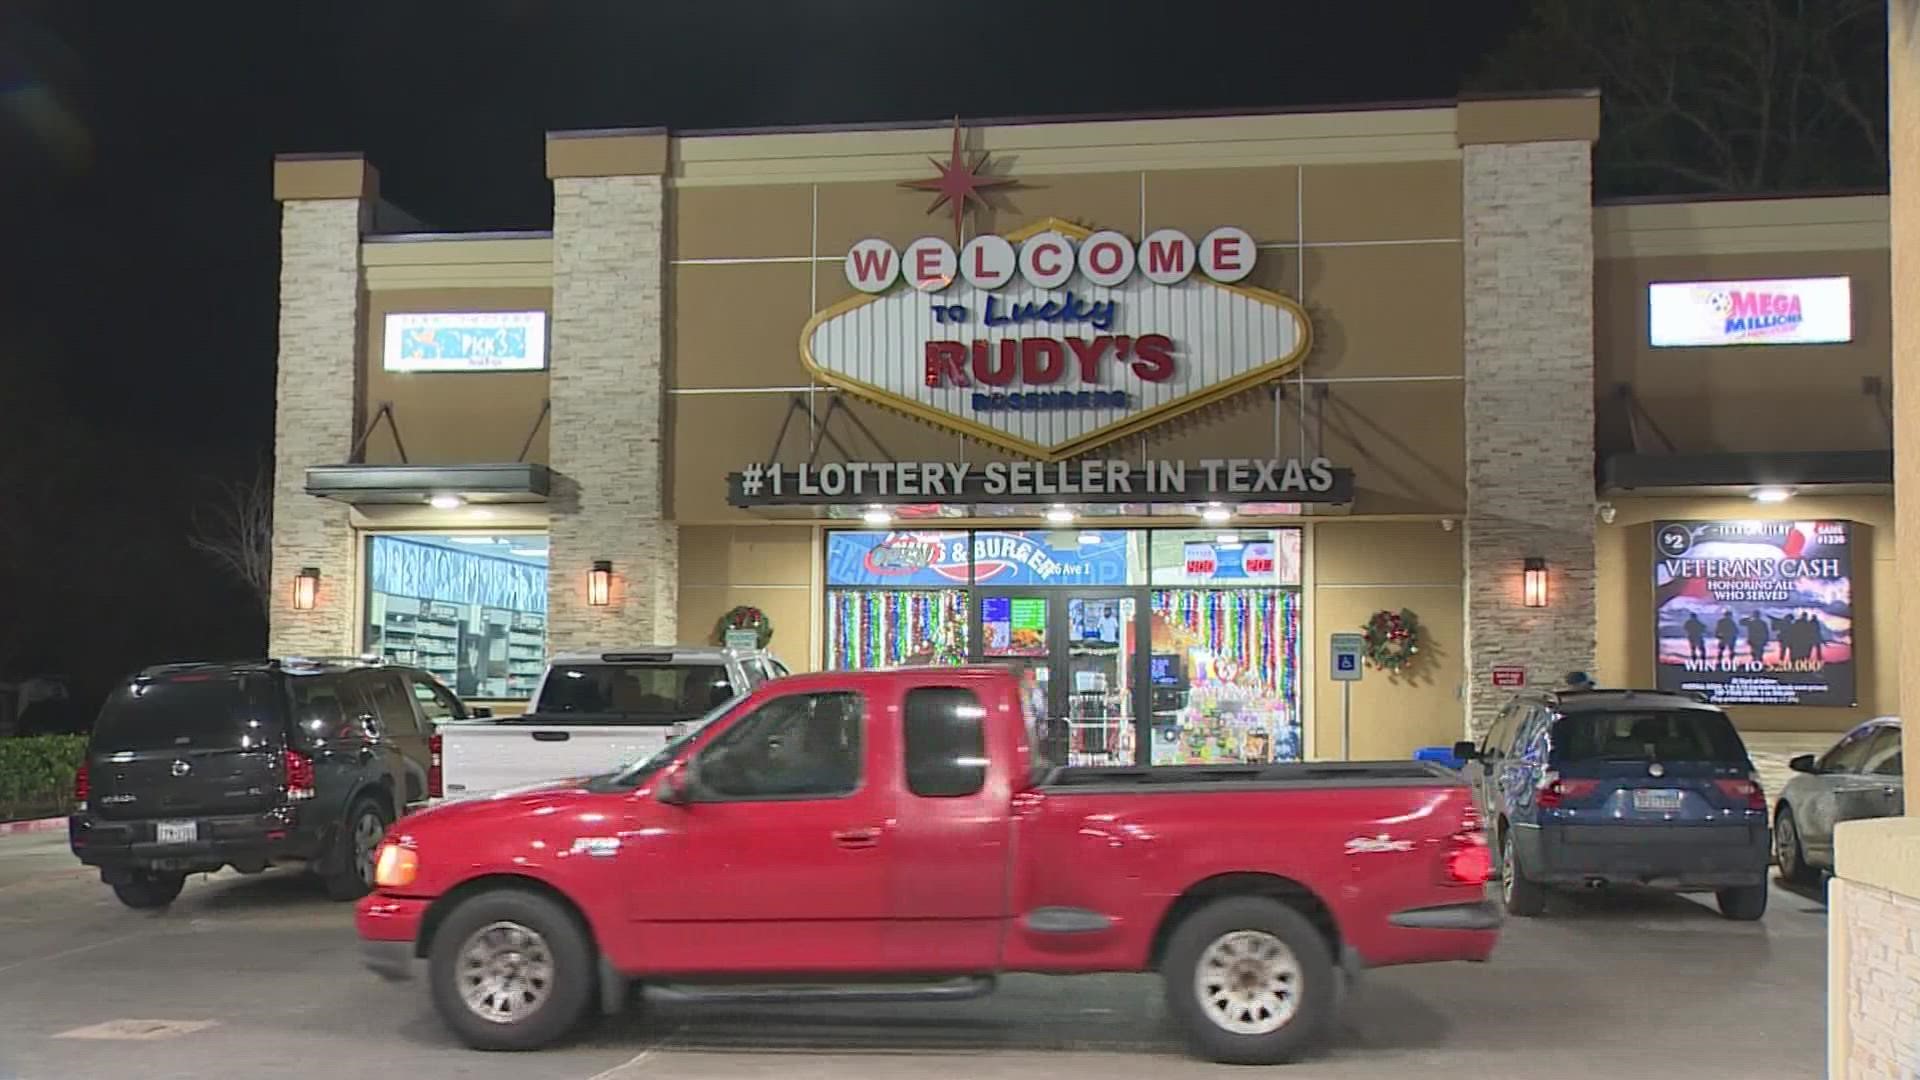 $400 million Powerball up for grabs, players hopeful Lucky Rudy's in Rosenberg will work some Christmas magic.